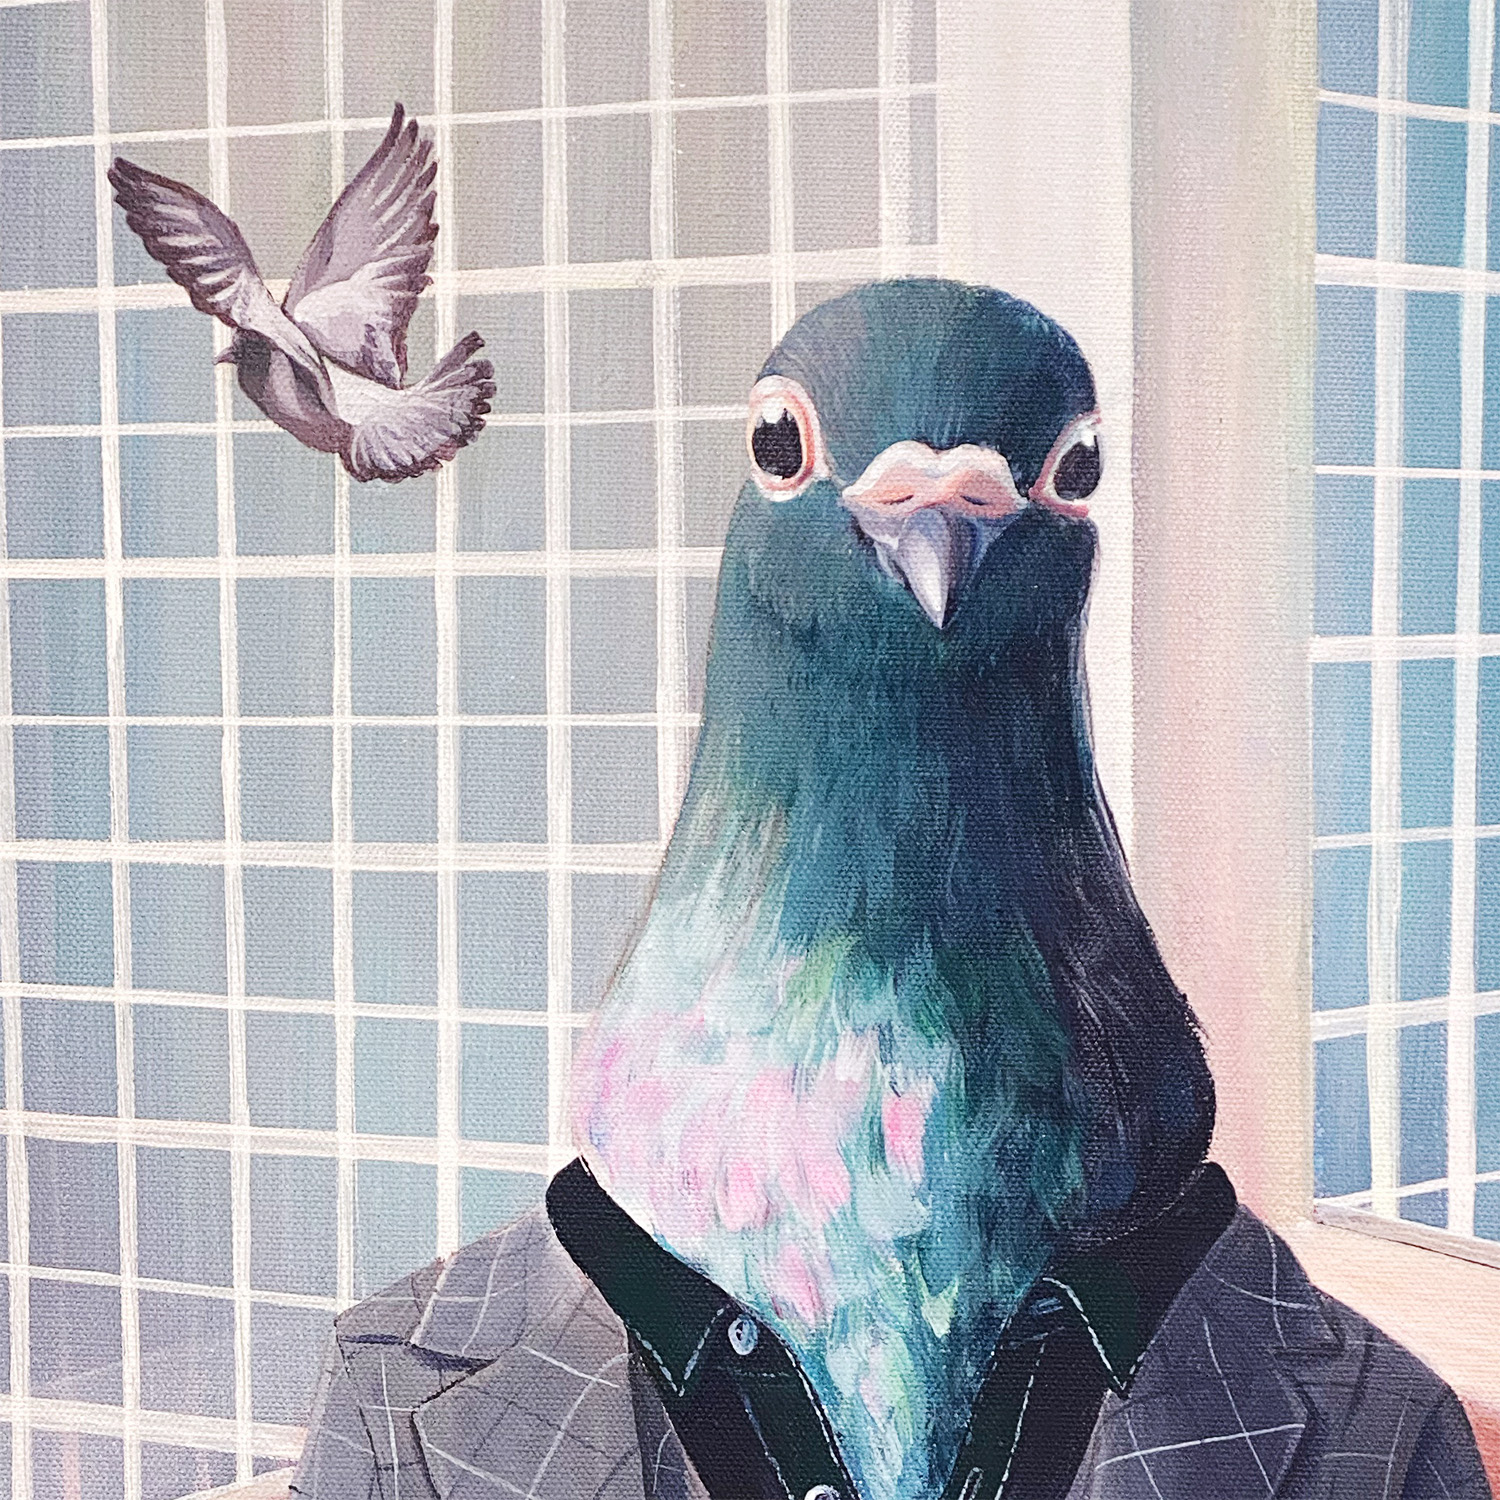 Detail of 'Chairman of the Bird', a surreal acrylic painting by Liz Broekhuyse